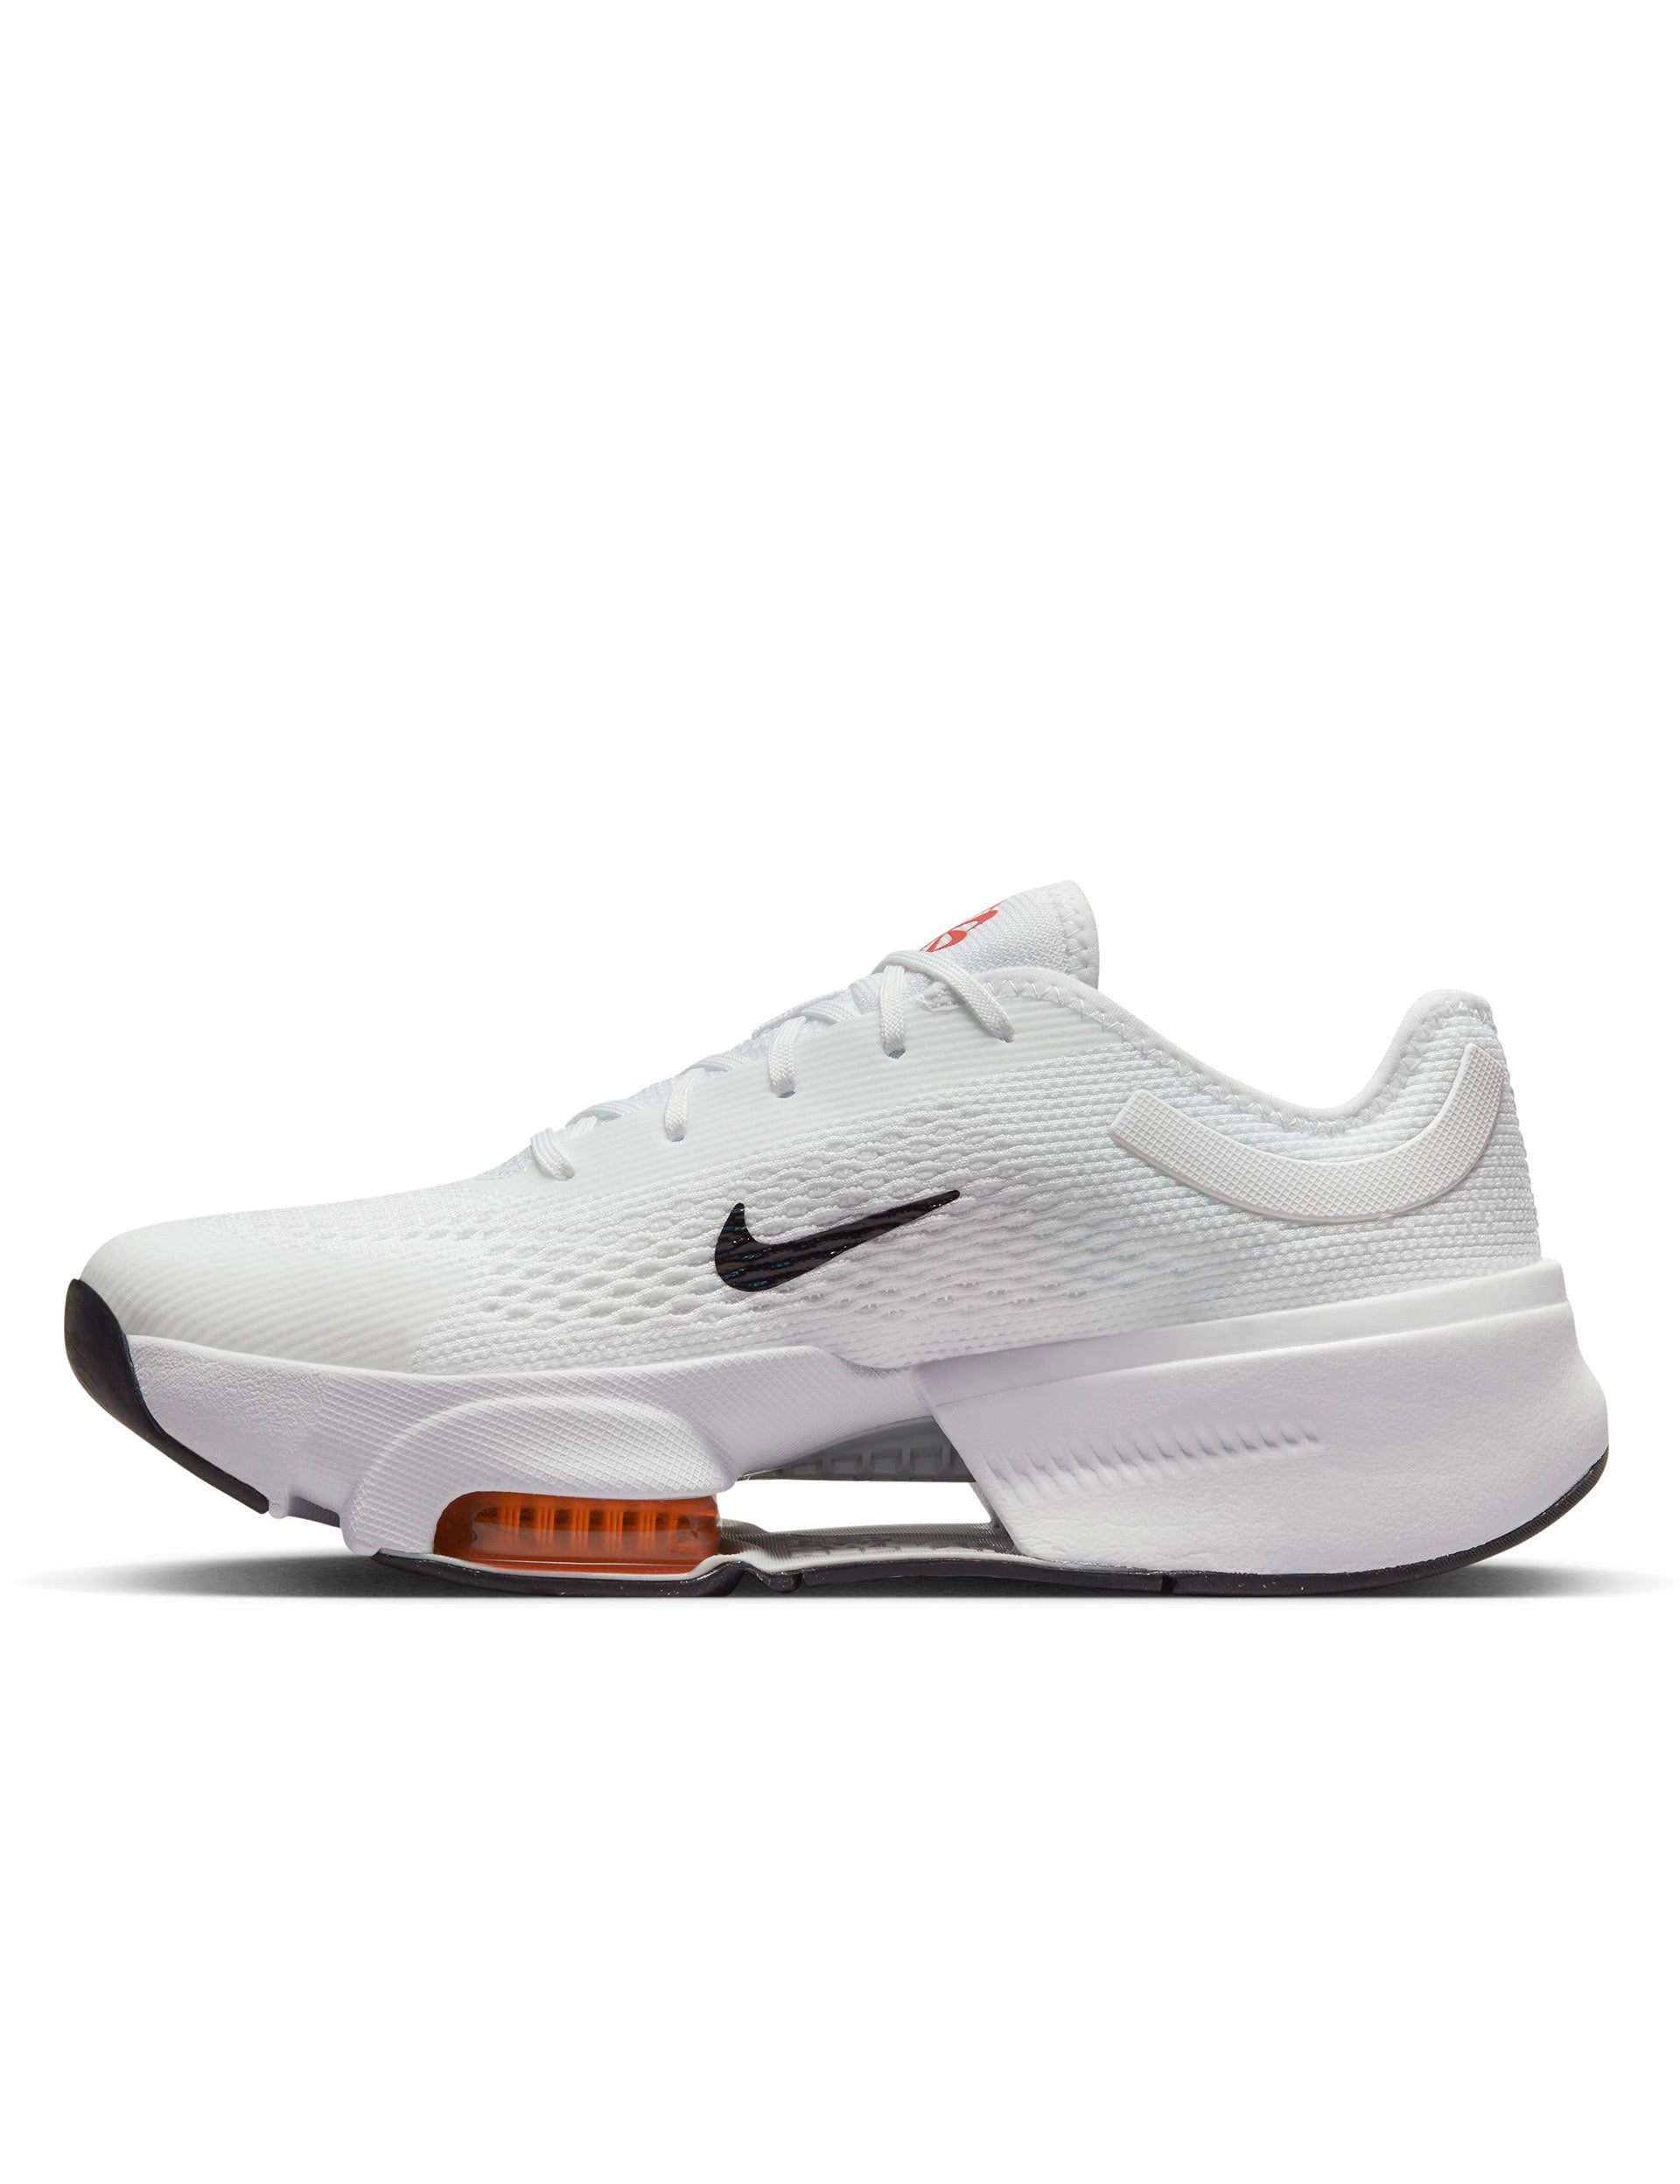 Nike Zoom Superrep Next Nature Shoes - White | Sports Edit